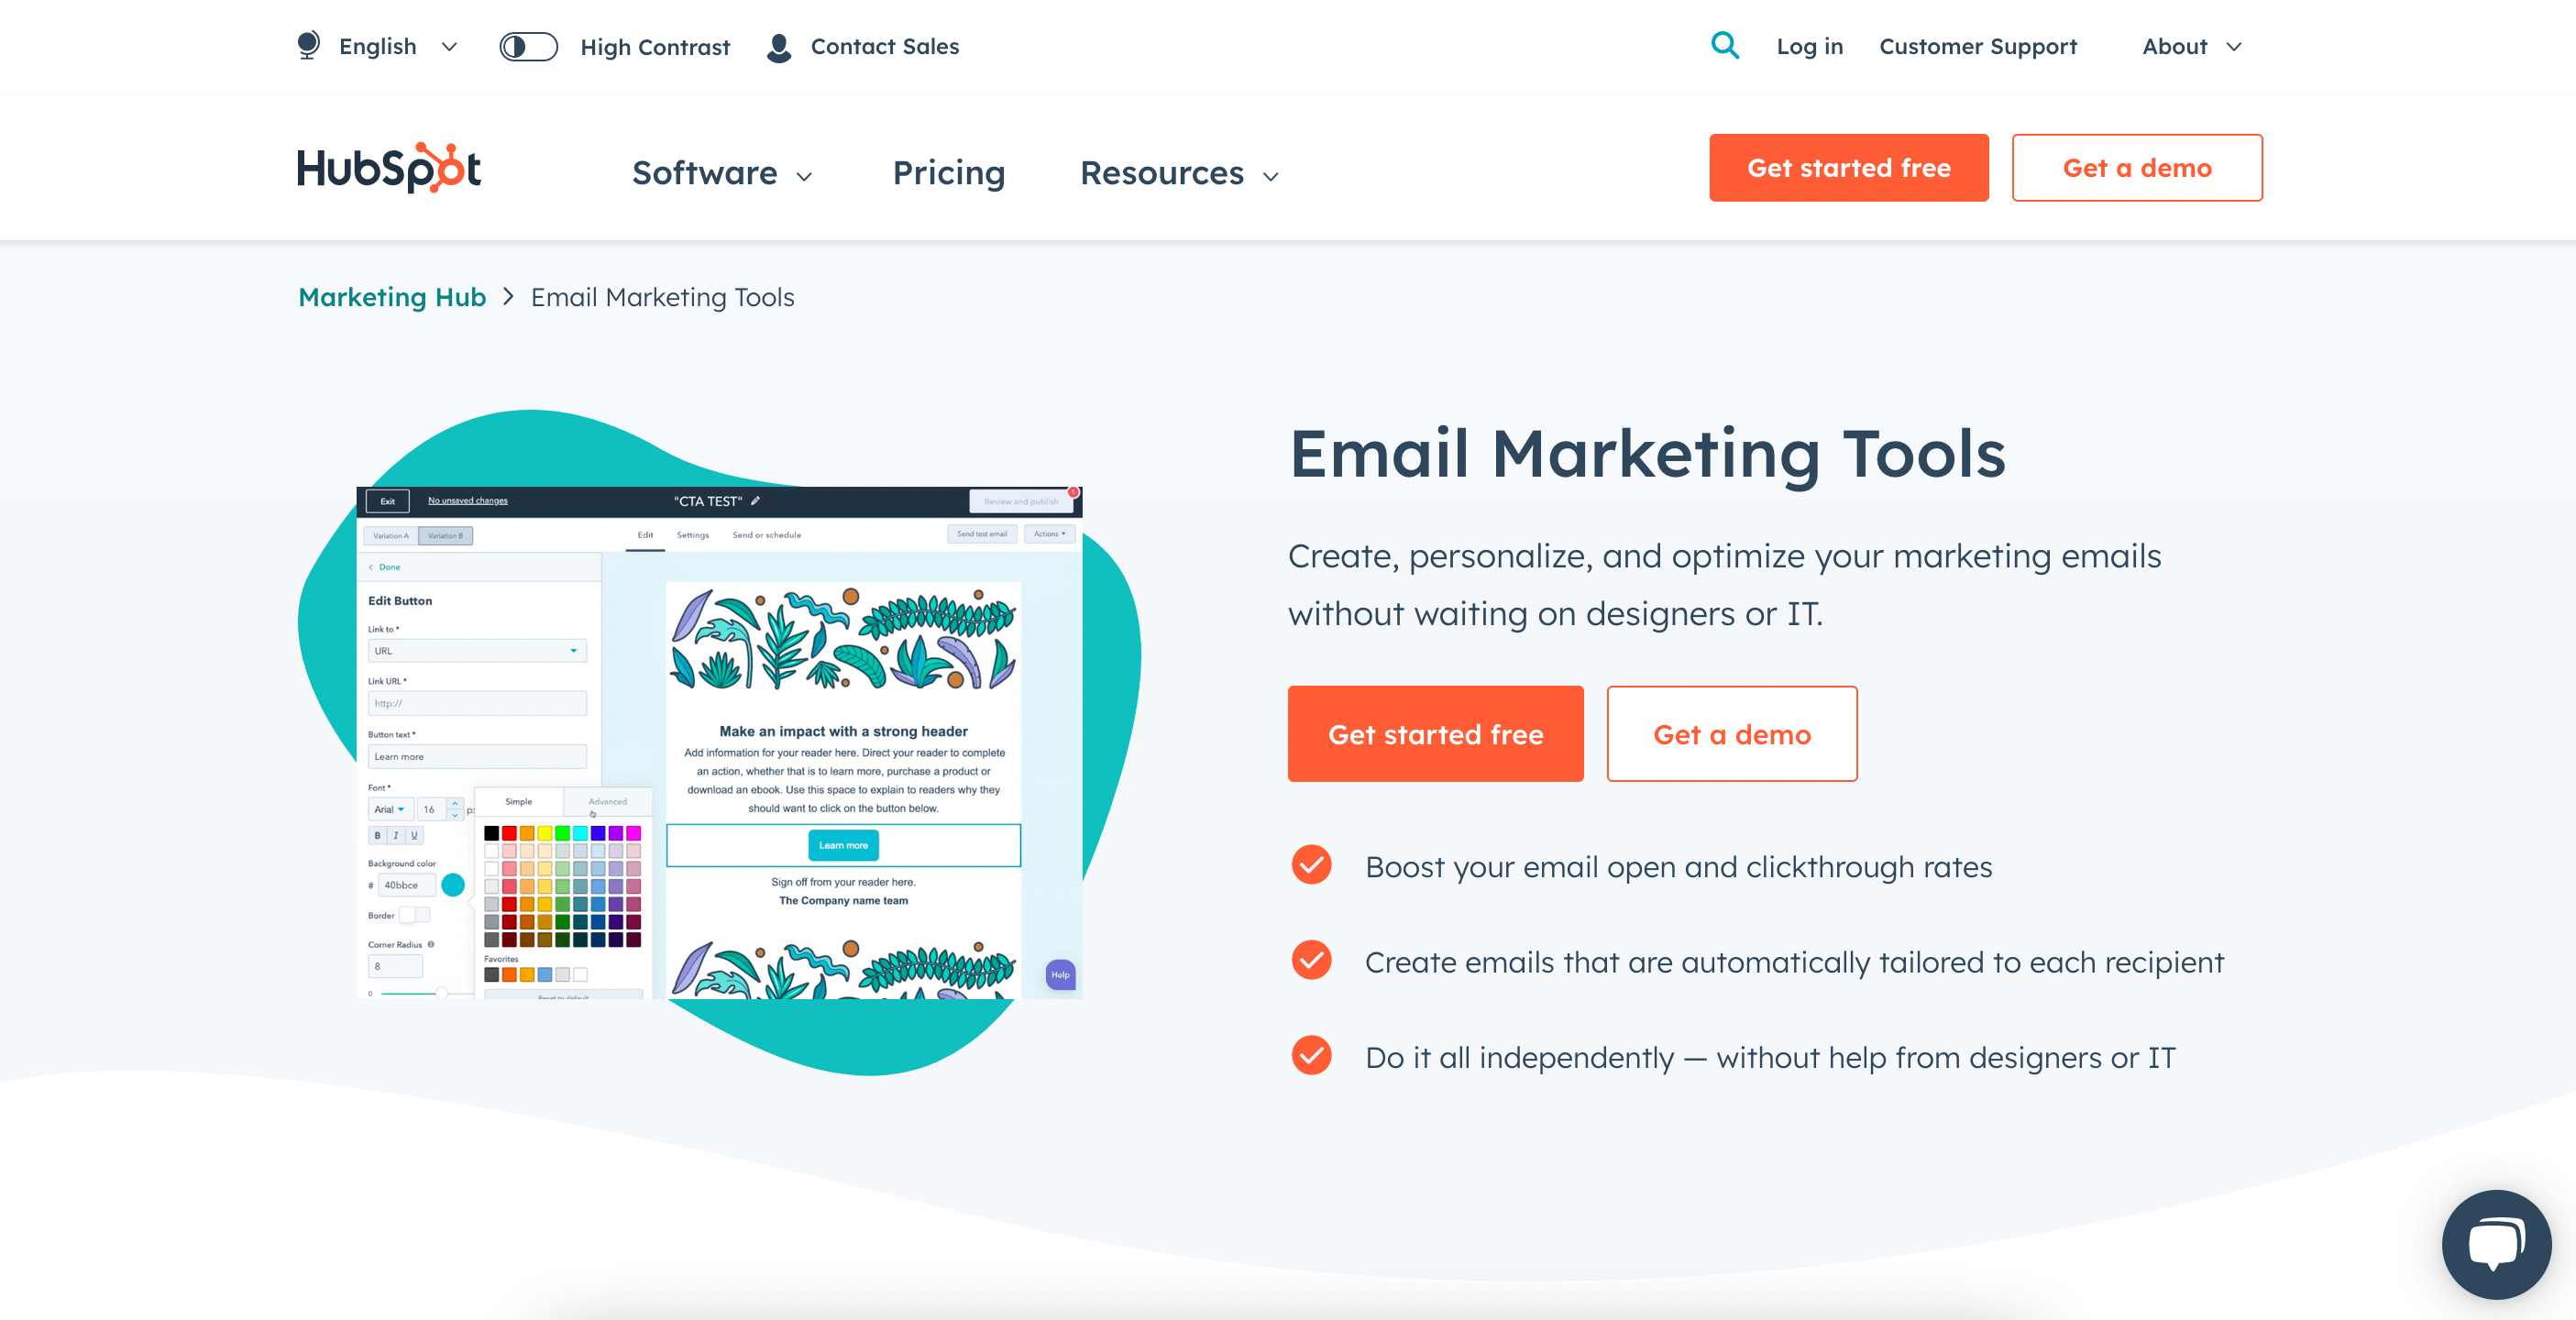 HubSpot’s email marketing tools’ main page